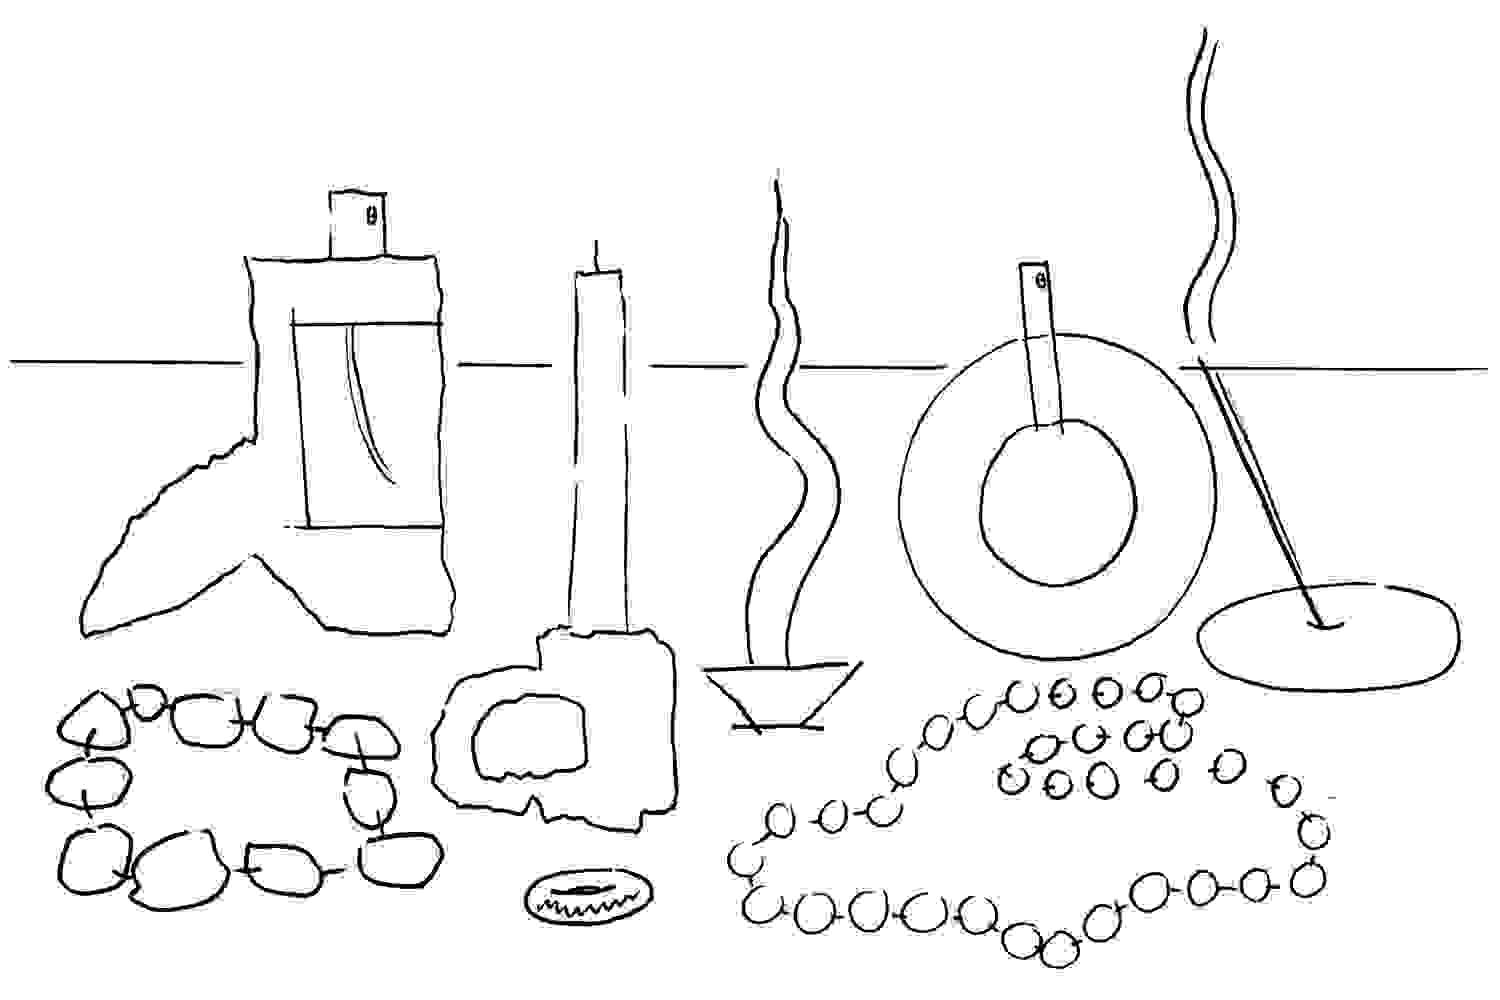 A black-and-white line drawing of various objects on a table, including perfume bottles, candlestick holders, an incense burner, beaded necklaces, and a ring.